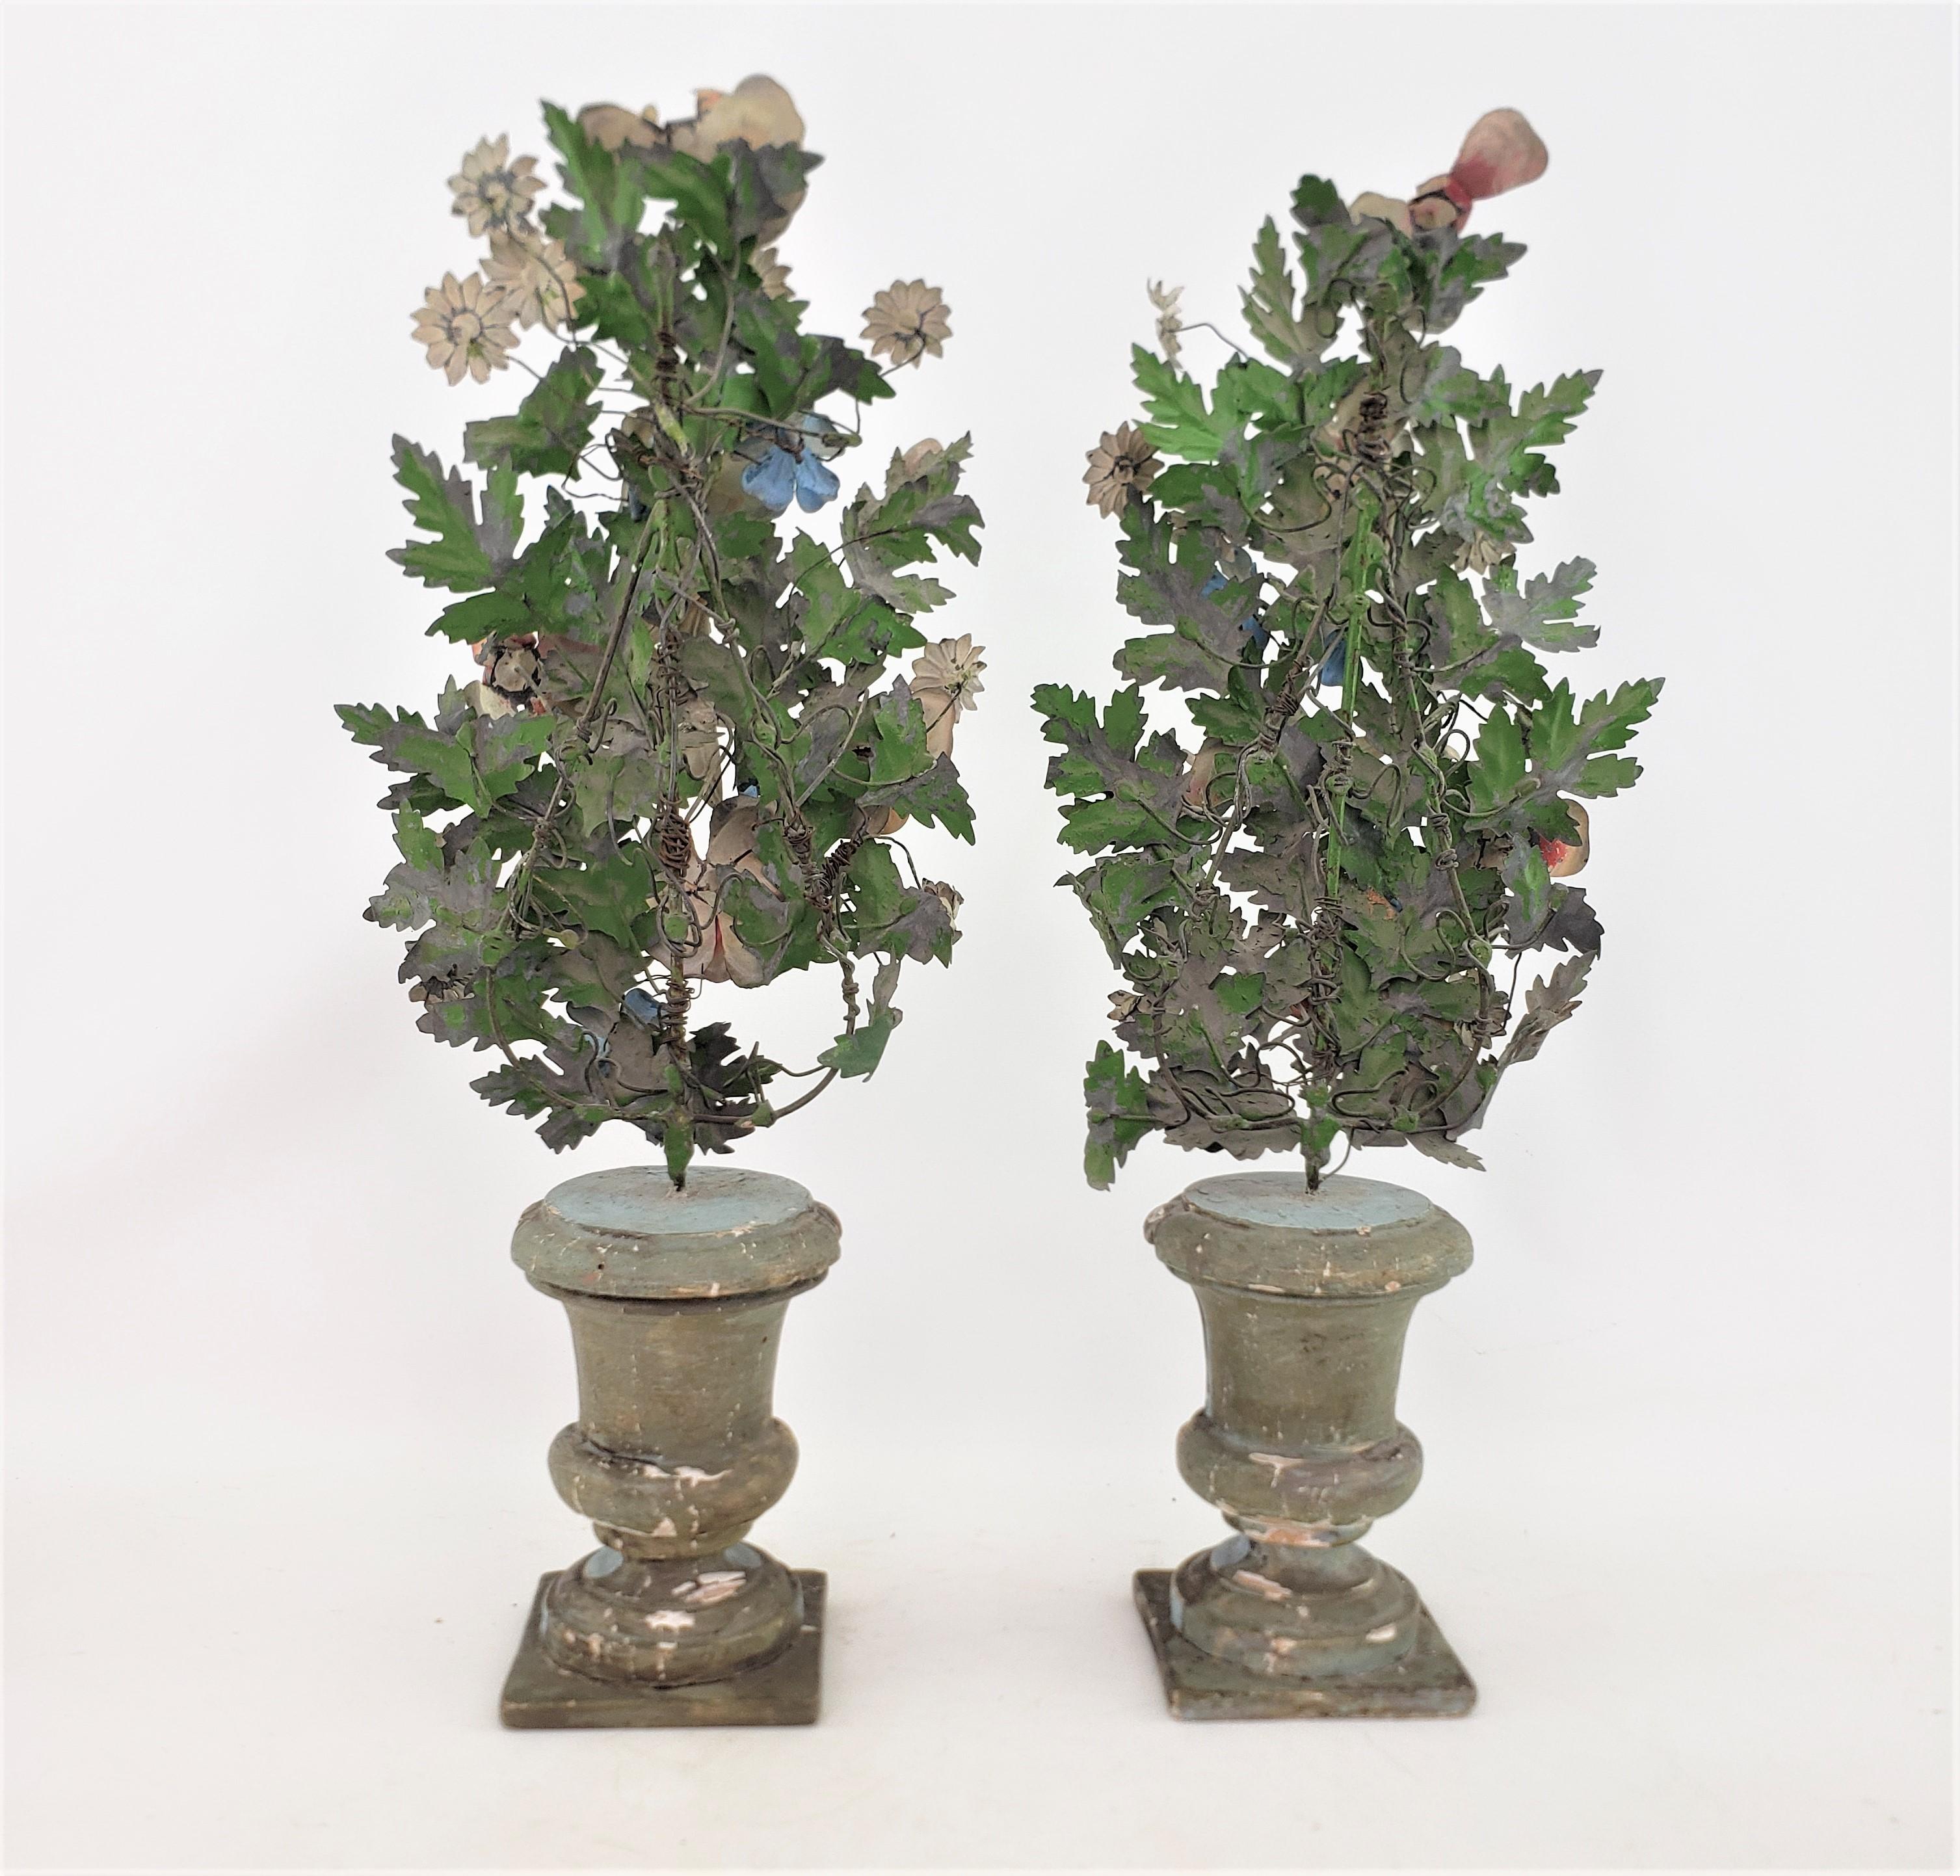 Pair of Antique French Sculptural Toleware Potted Floral Bouquets or Garnitures In Good Condition For Sale In Hamilton, Ontario